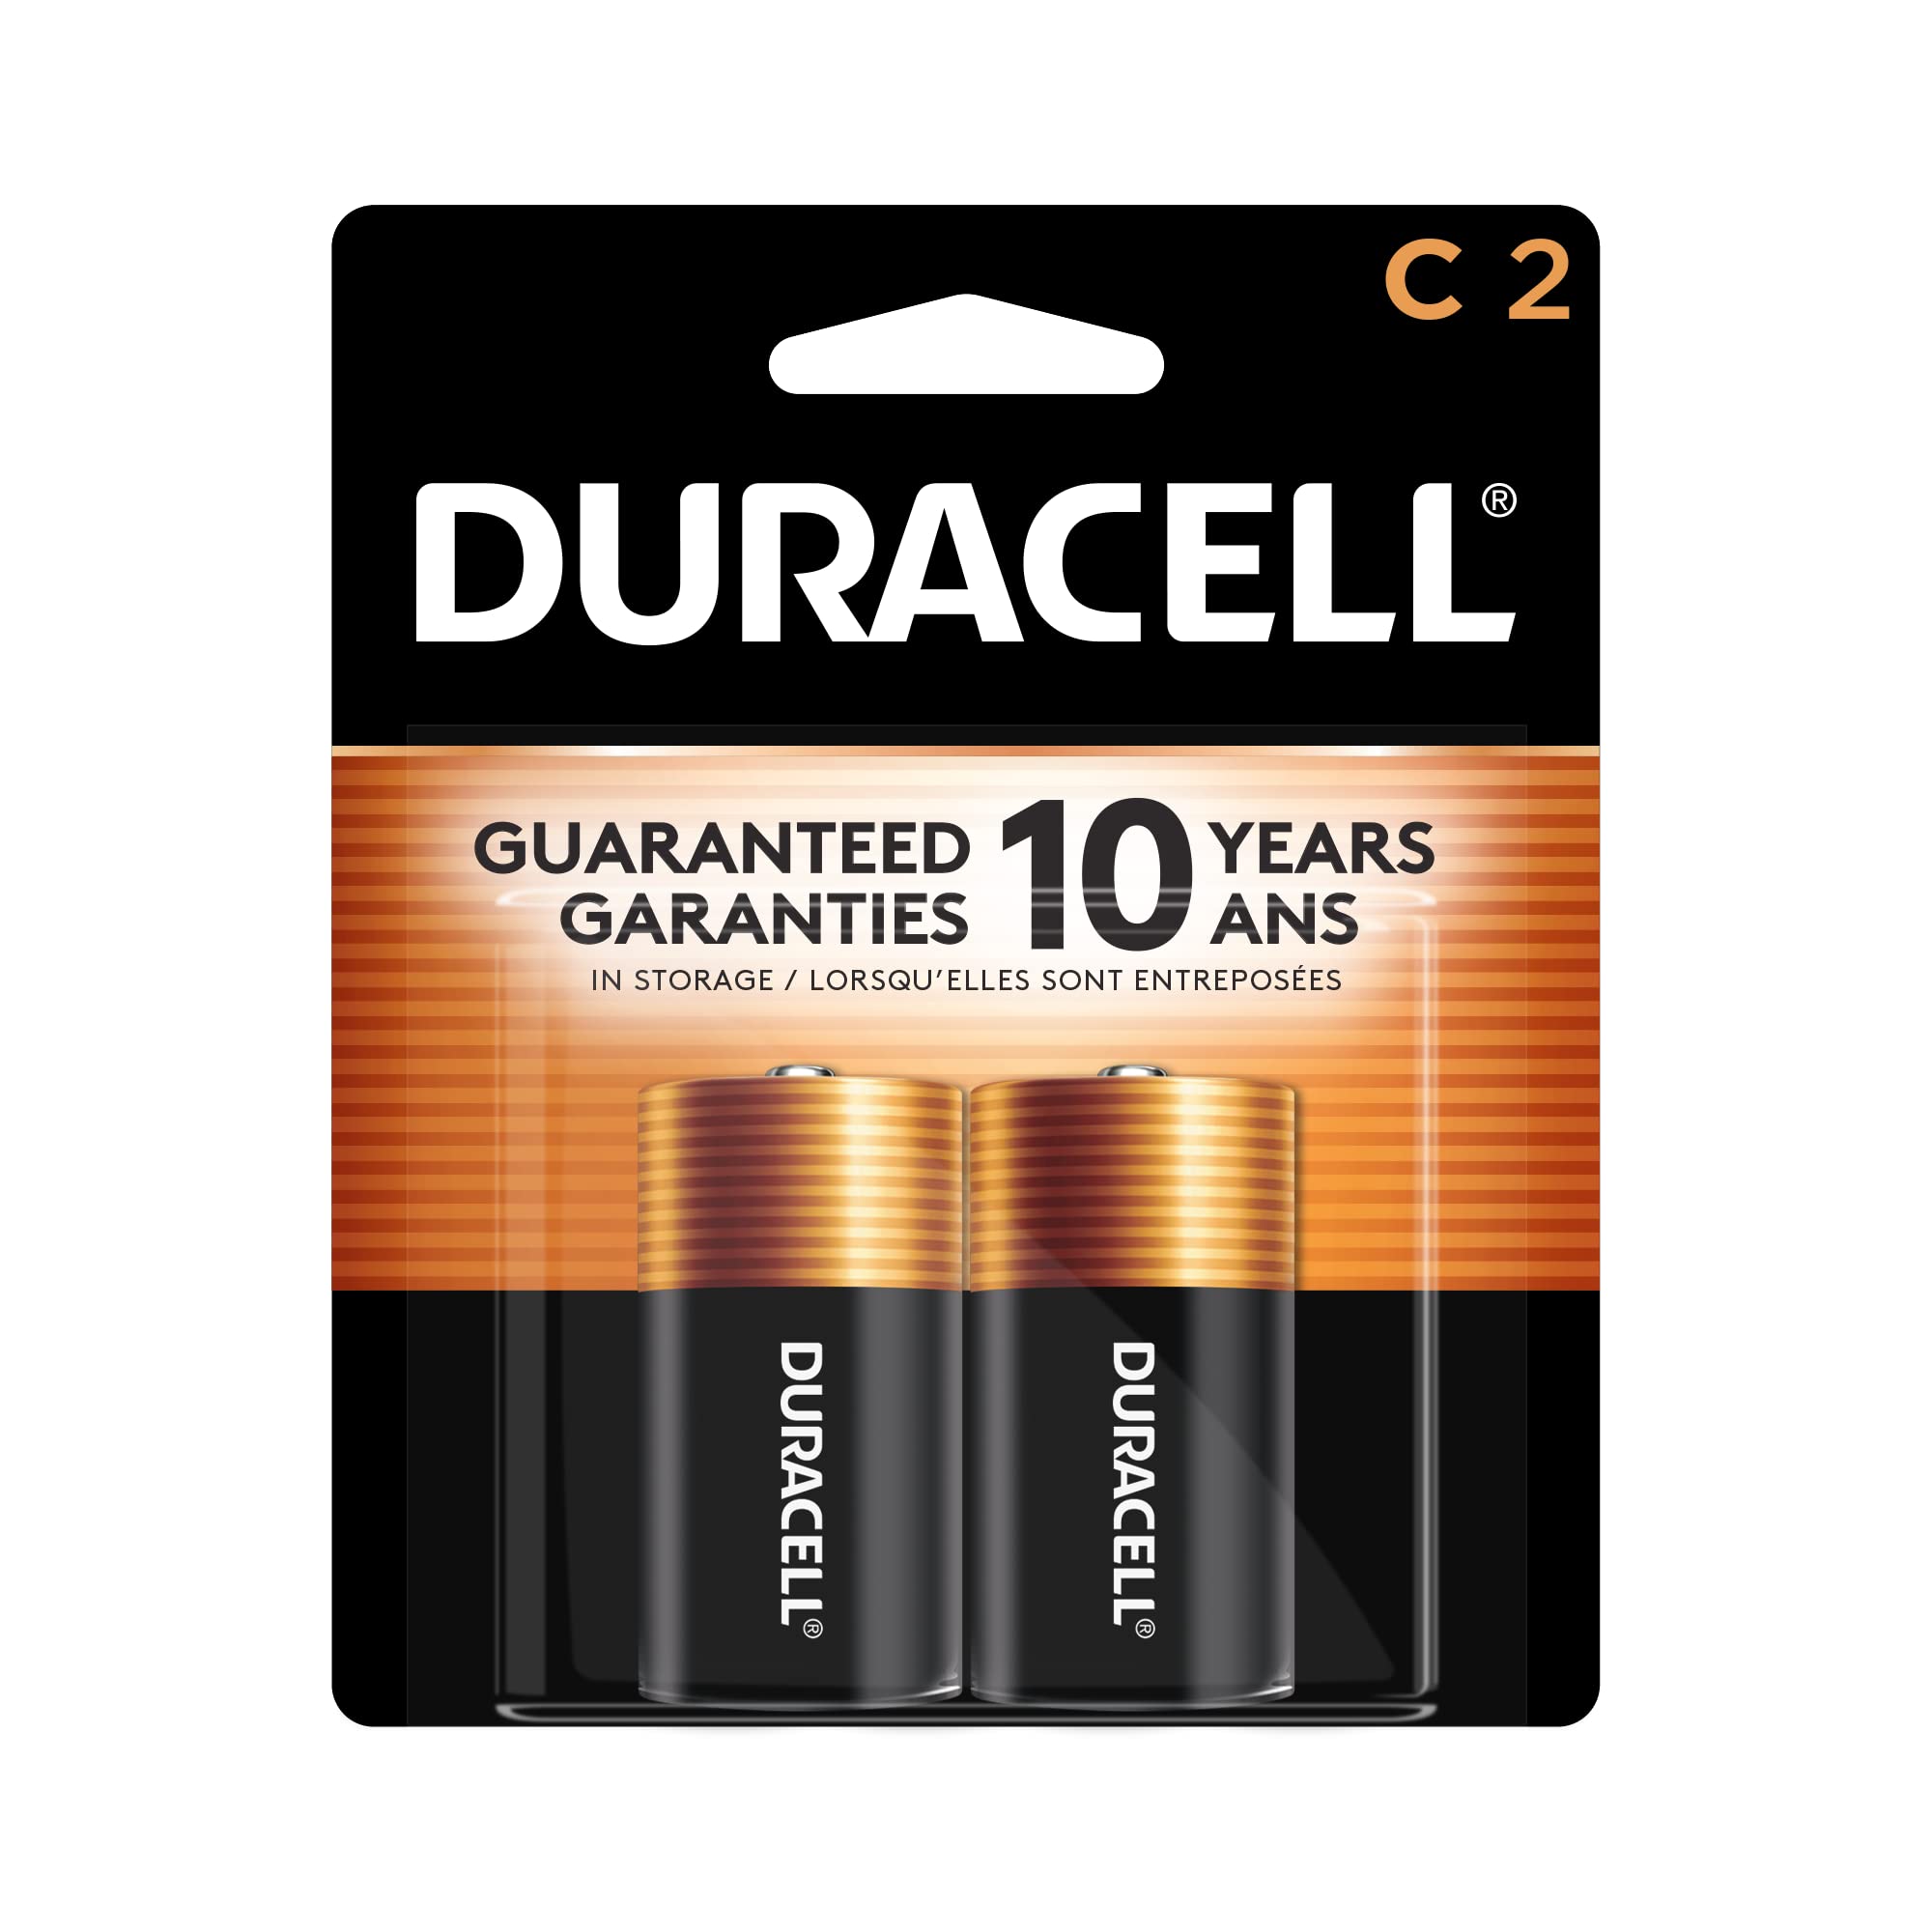 Duracell Coppertop C Batteries, 2 Count Pack, C Battery with Long-lasting Power, All-Purpose Alkaline C Battery for Household and Office Devices